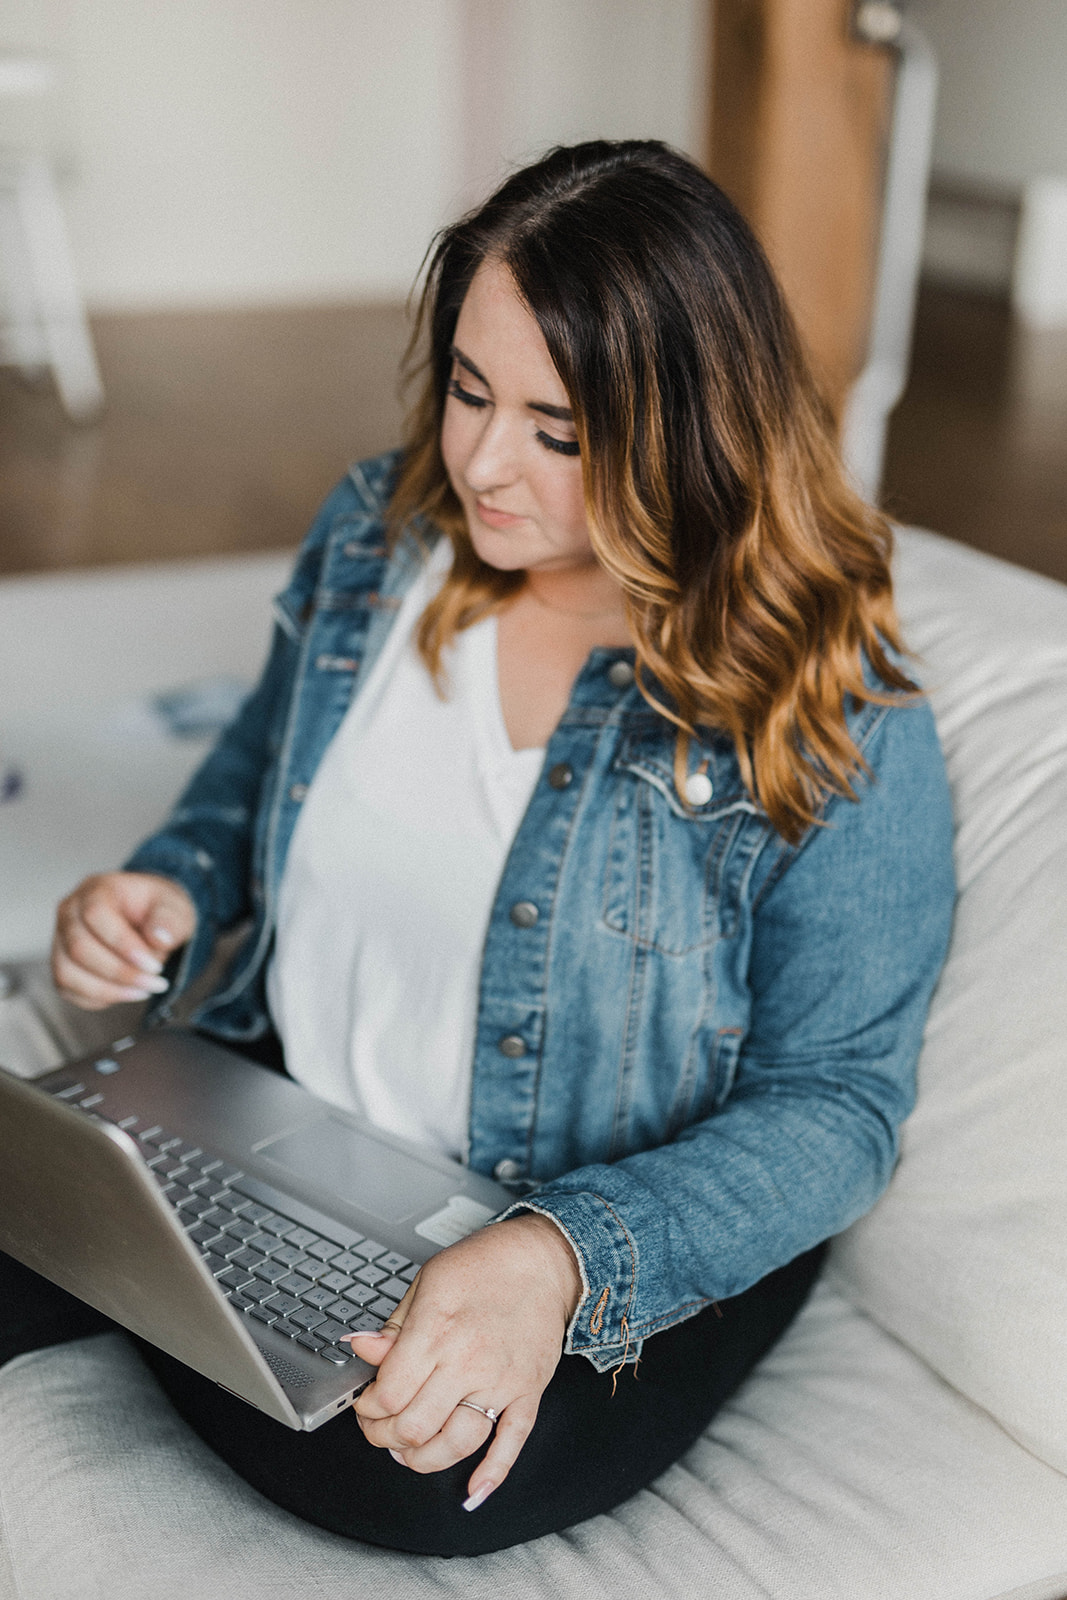 Setting up your blog or transfering your blog can seem confusing and overwhelming when you first get started. Luckily our Showit insiders series is showing you today how to blog using showit.